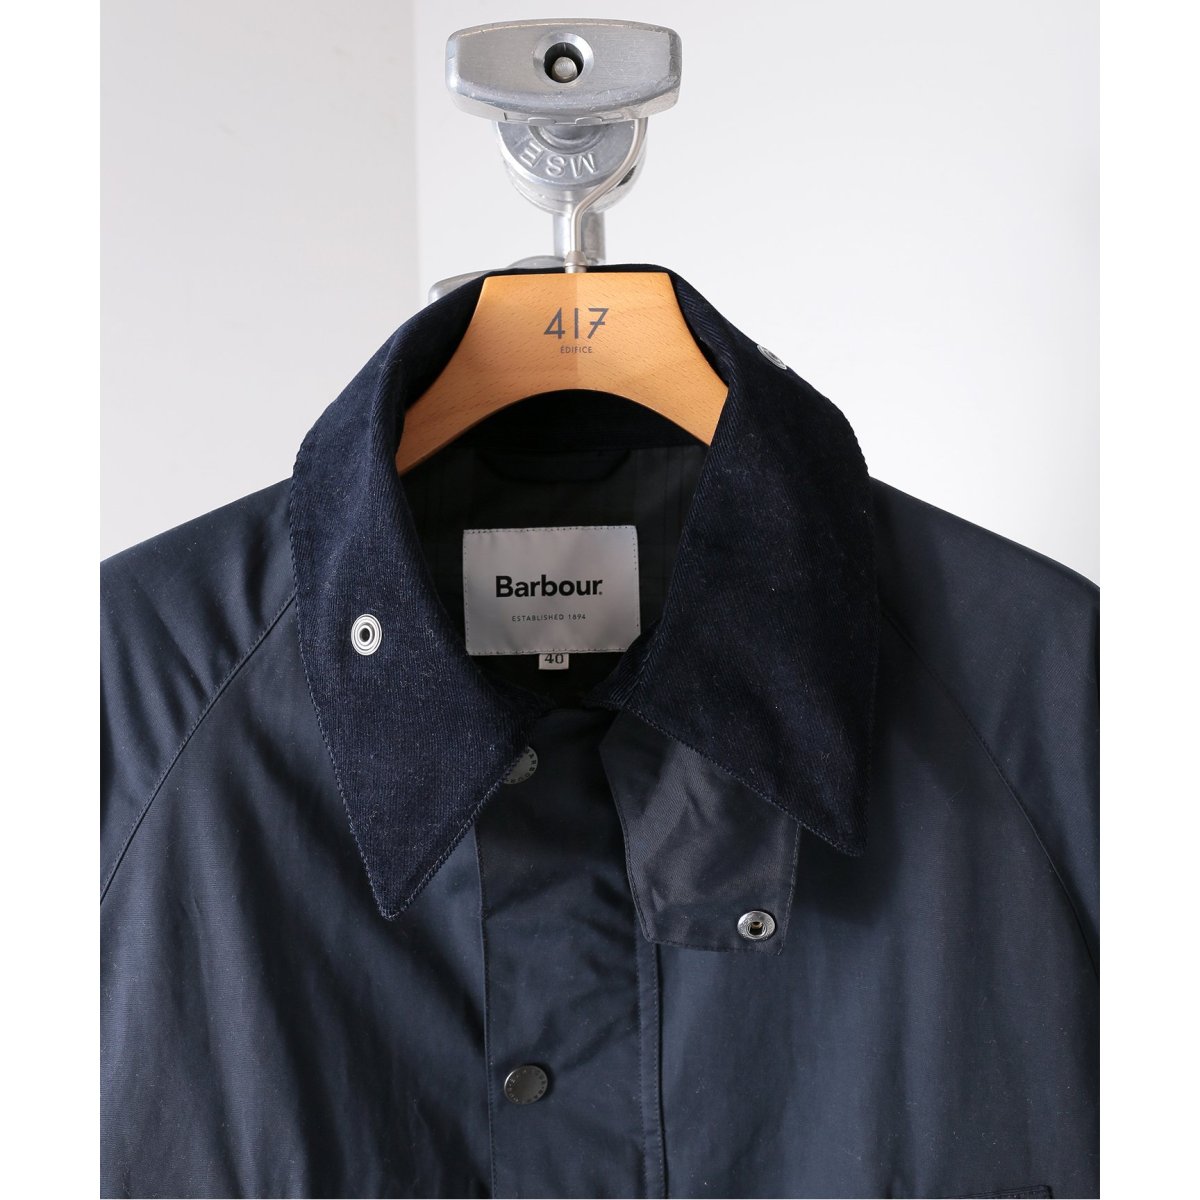 417 EDIFICE【BARBOUR】別注 OVER SIZE BEDALE www.dinh.dk